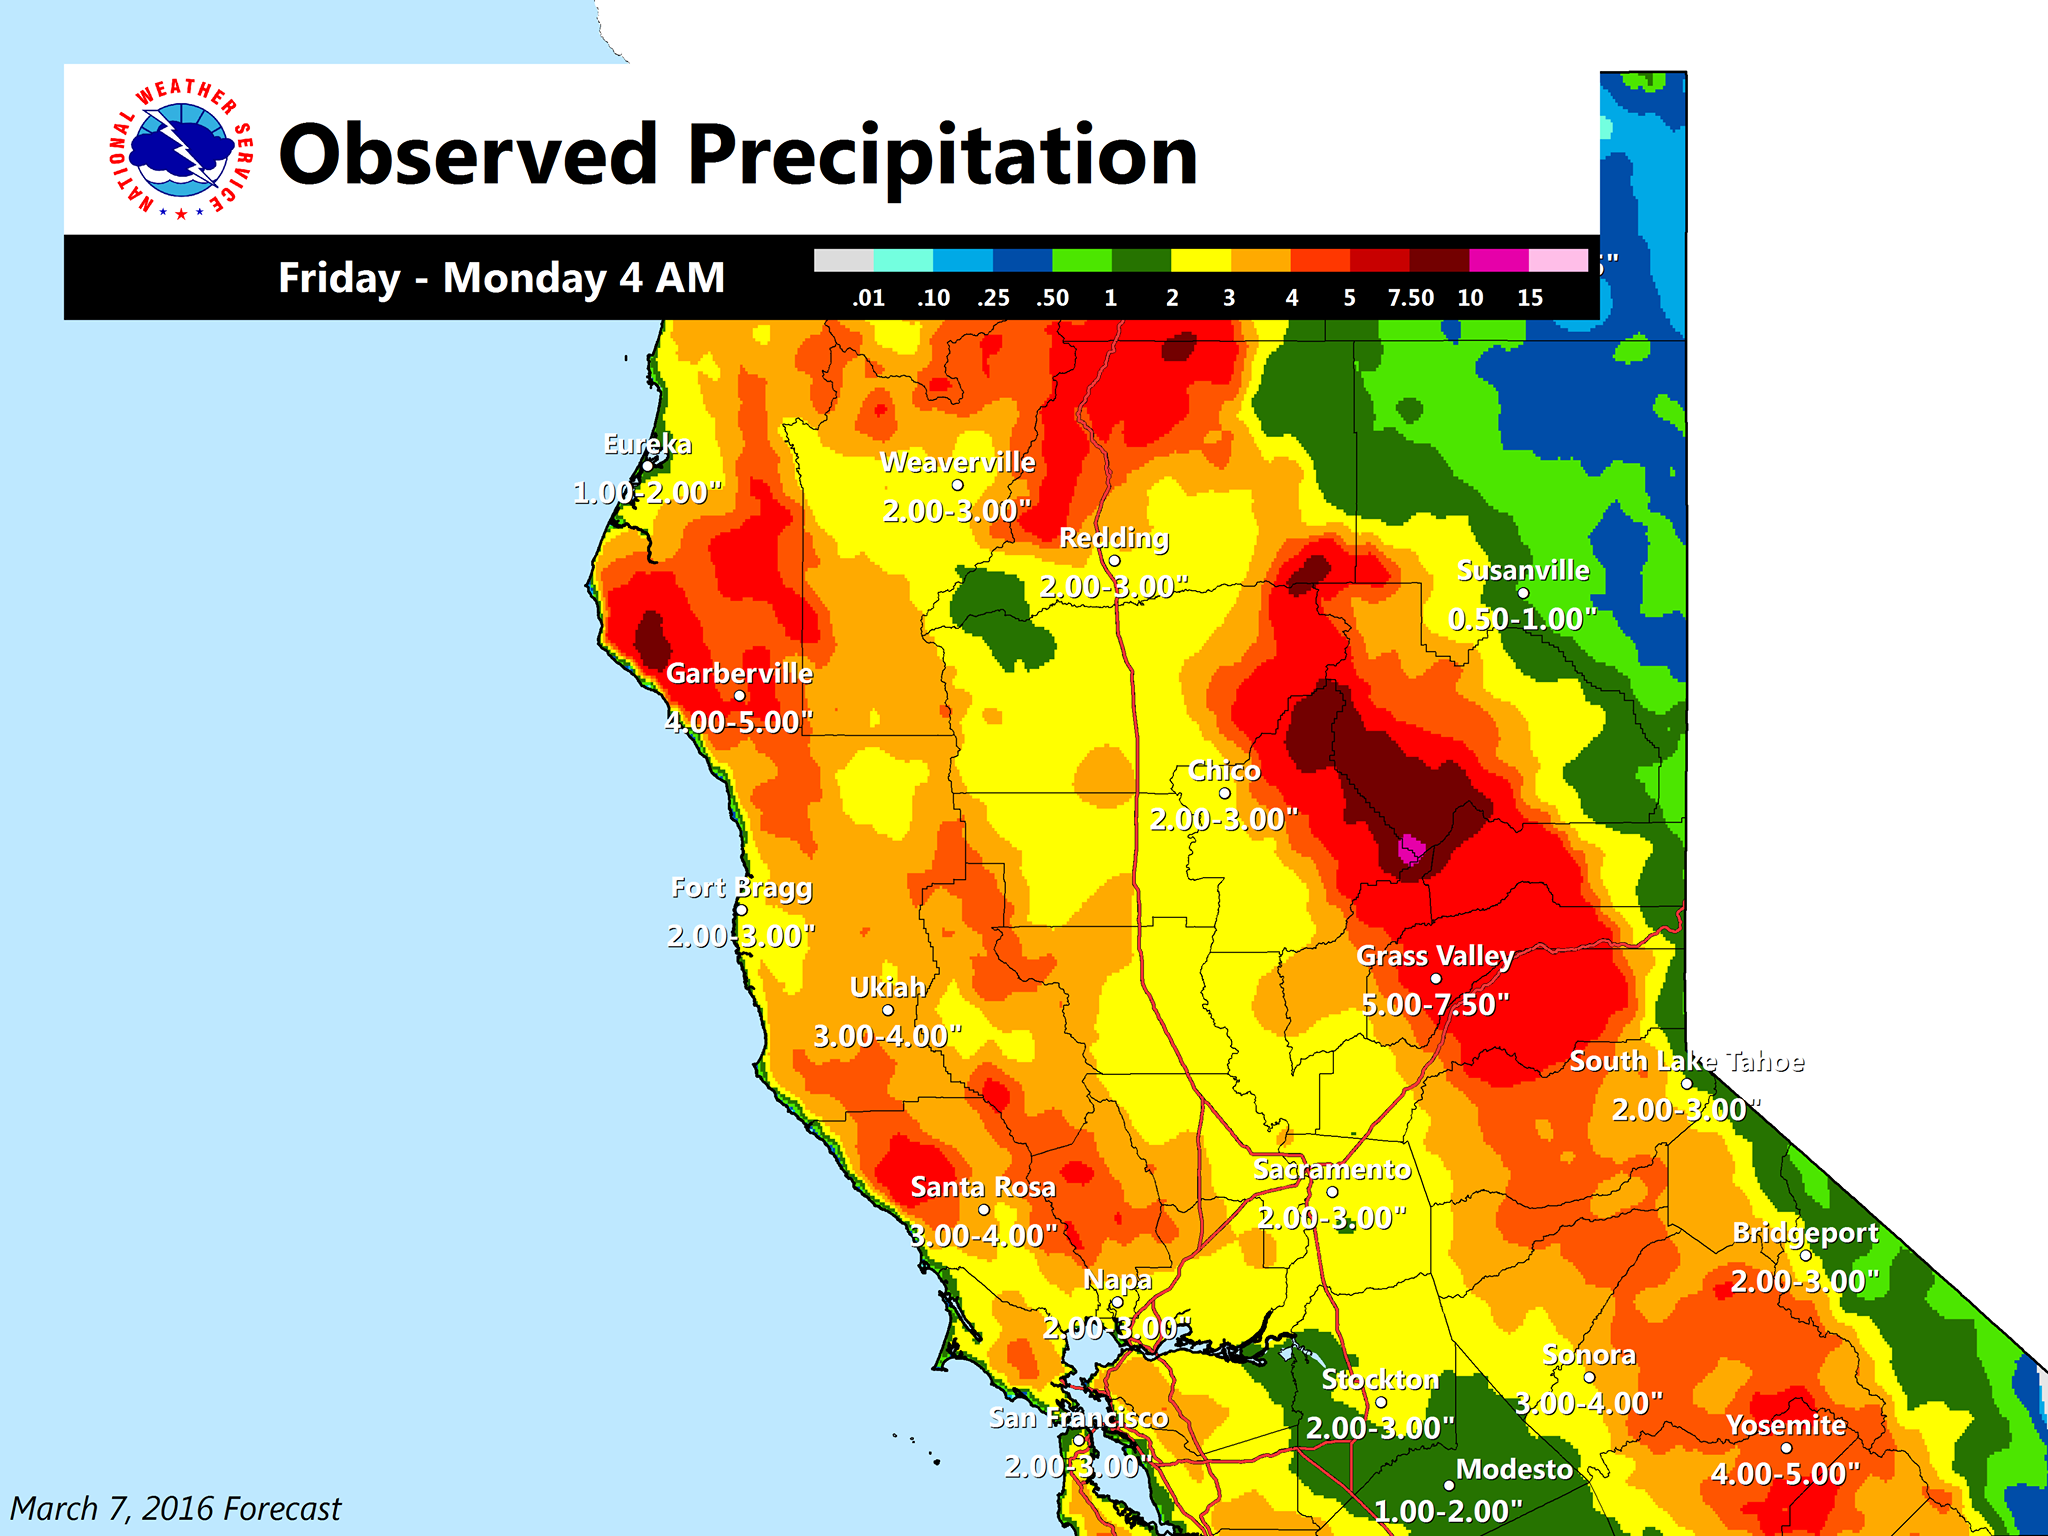 "Very active weekend of weather for NorCal! Curious how much rain fell? Here is an image we threw together this morning (unofficial amounts so far) showing the rain totals from Friday through early this morning (Monday 4 am). Some very hefty amounts generally from 1" to 3" in the valley and up to 10" in the Feather River Basin area!" - NOAA Sacramento, CA today